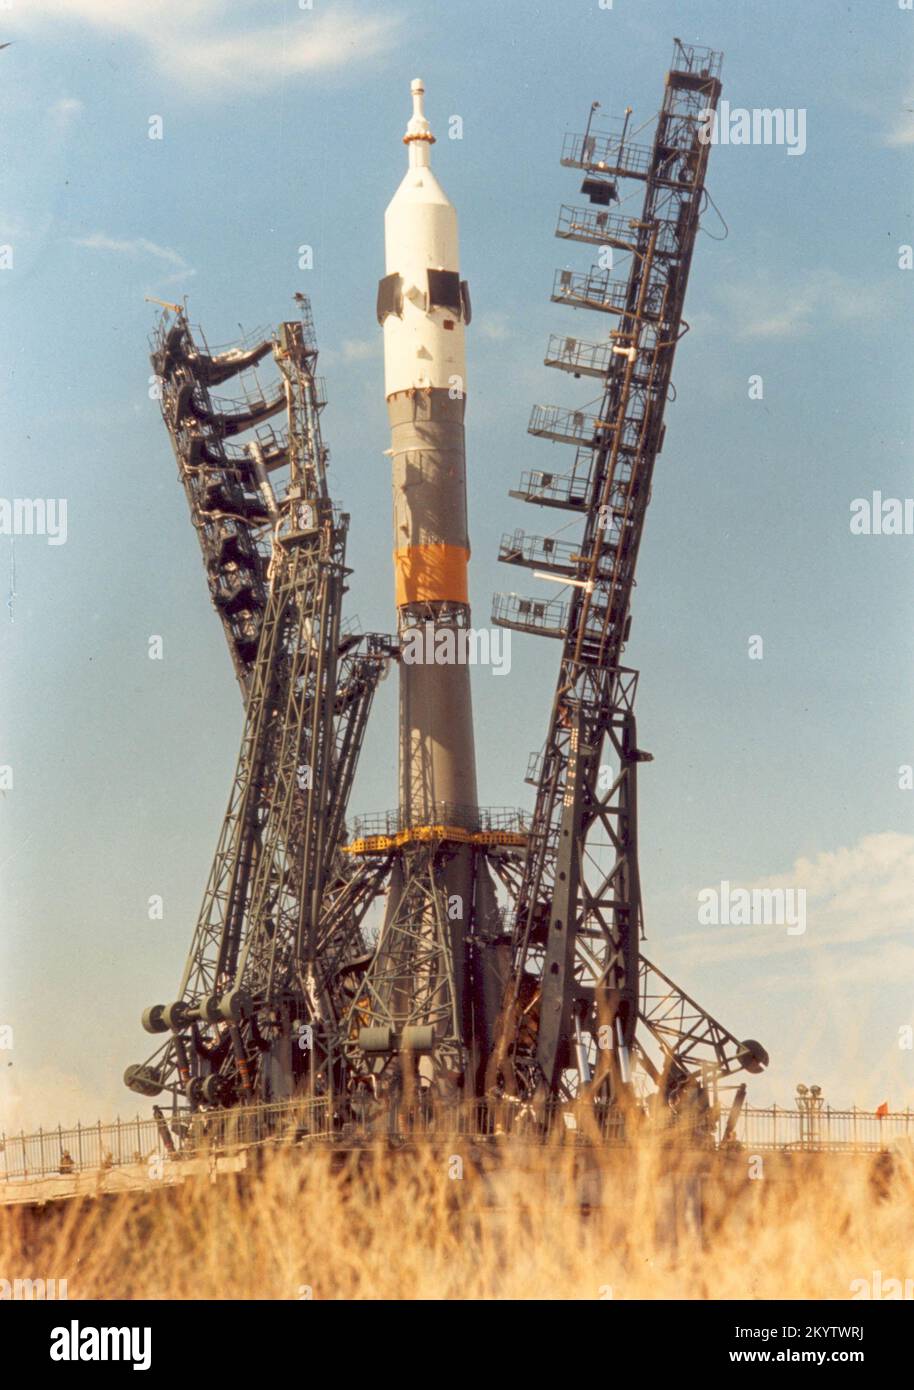 The Soyuz spacecraft and launch vehicle are installed on the launch pad at the Baikonur complex in Kazakhstan. Baikonur is the world's largest space center. This launch was part of the Apollo-Soyuz Test Project (ASTP), a cooperative space mission between the United States and the USSR. The goals of ASTP were to test the ability of American and Soviet spacecraft to rendezvous and dock in space and to open the doors to possible international rescue missions and future collaboration on manned spaceflights. The Soyuz and Apollo crafts launched from Baikonur and the Kennedy Space Center respectivel Stock Photo